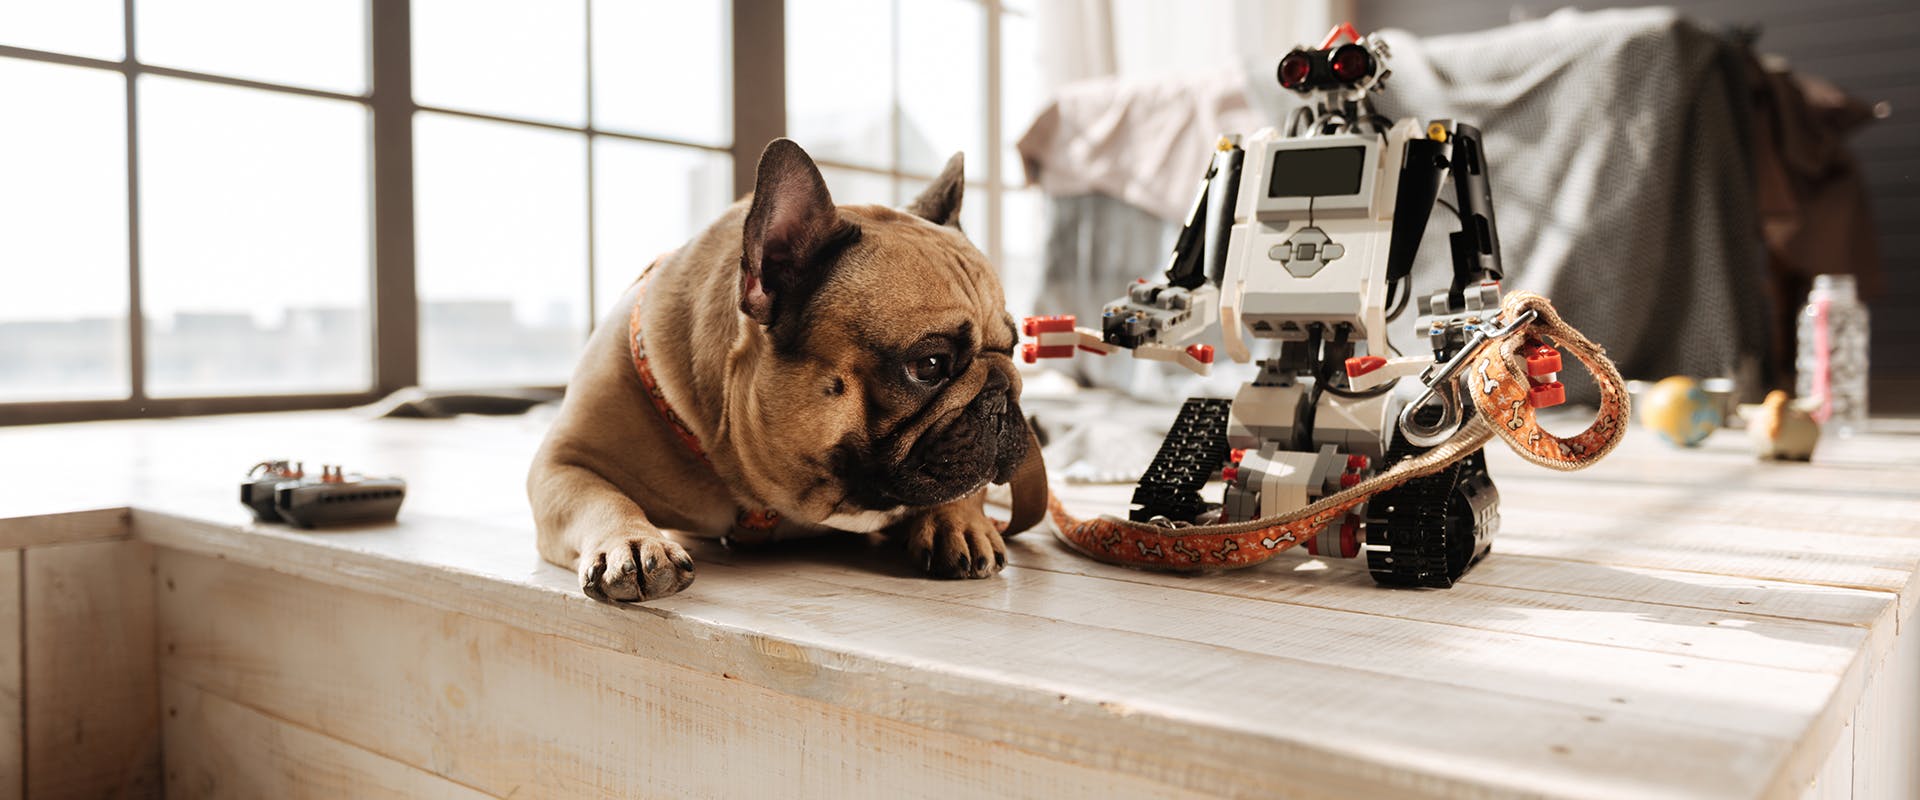 A small French Bulldog sitting next to a robot toy